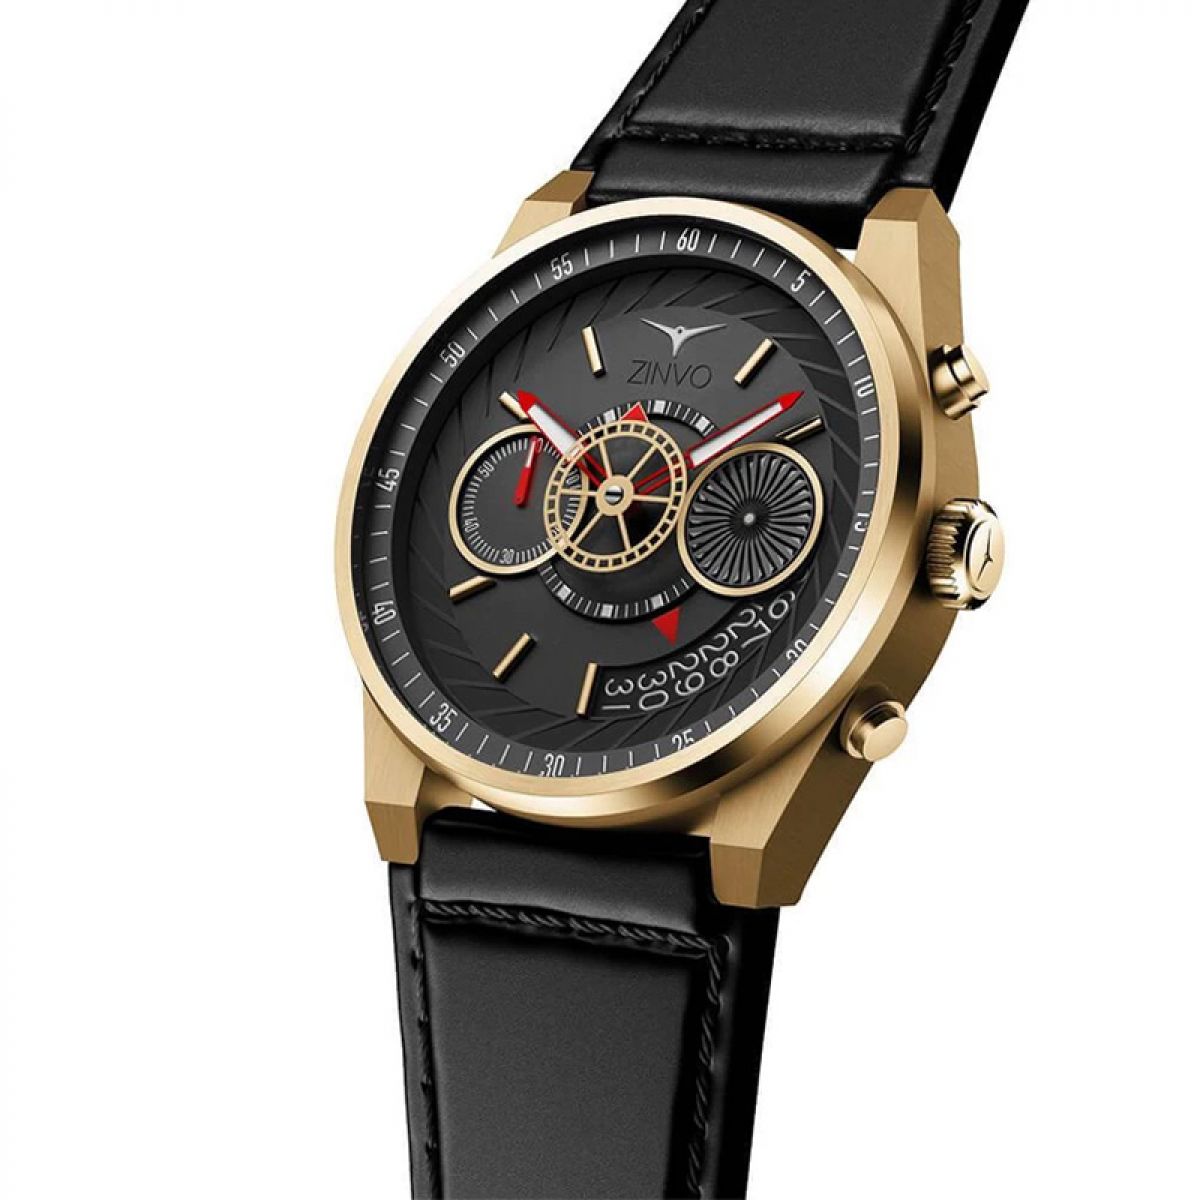 Archived Zinvo Chronographs | Gold